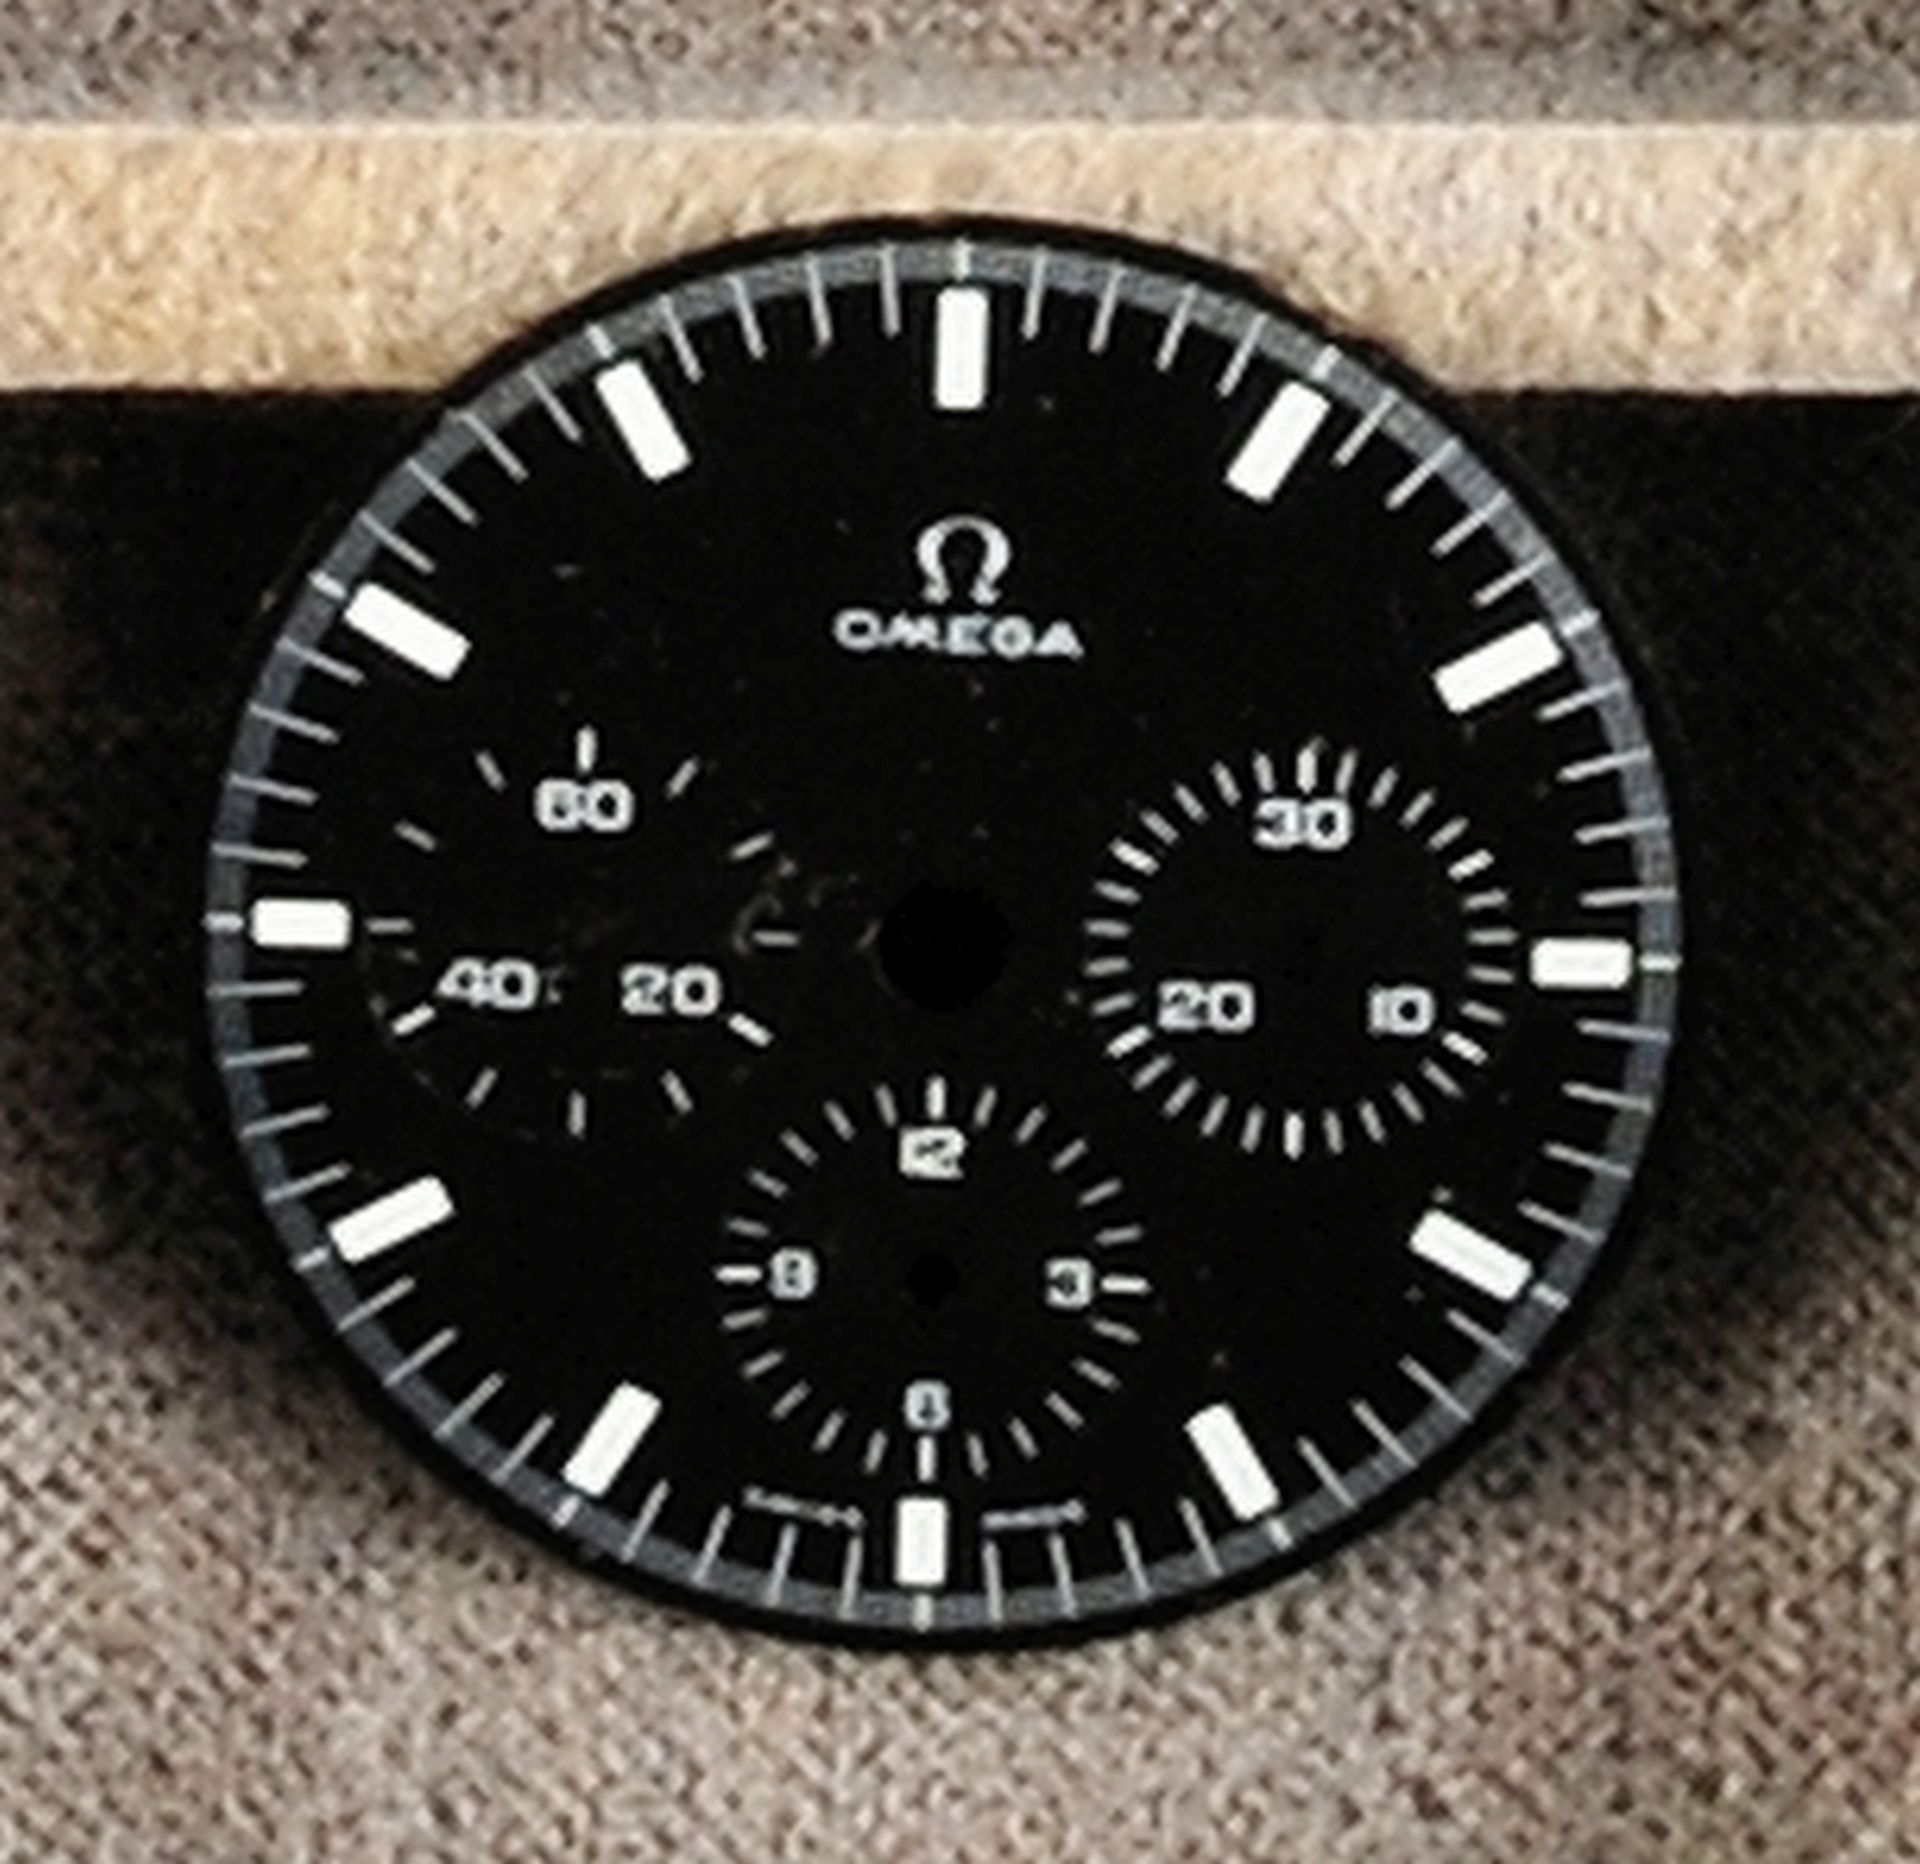 Omega chronograph dial for cal. 321, black dial with luminous indexes